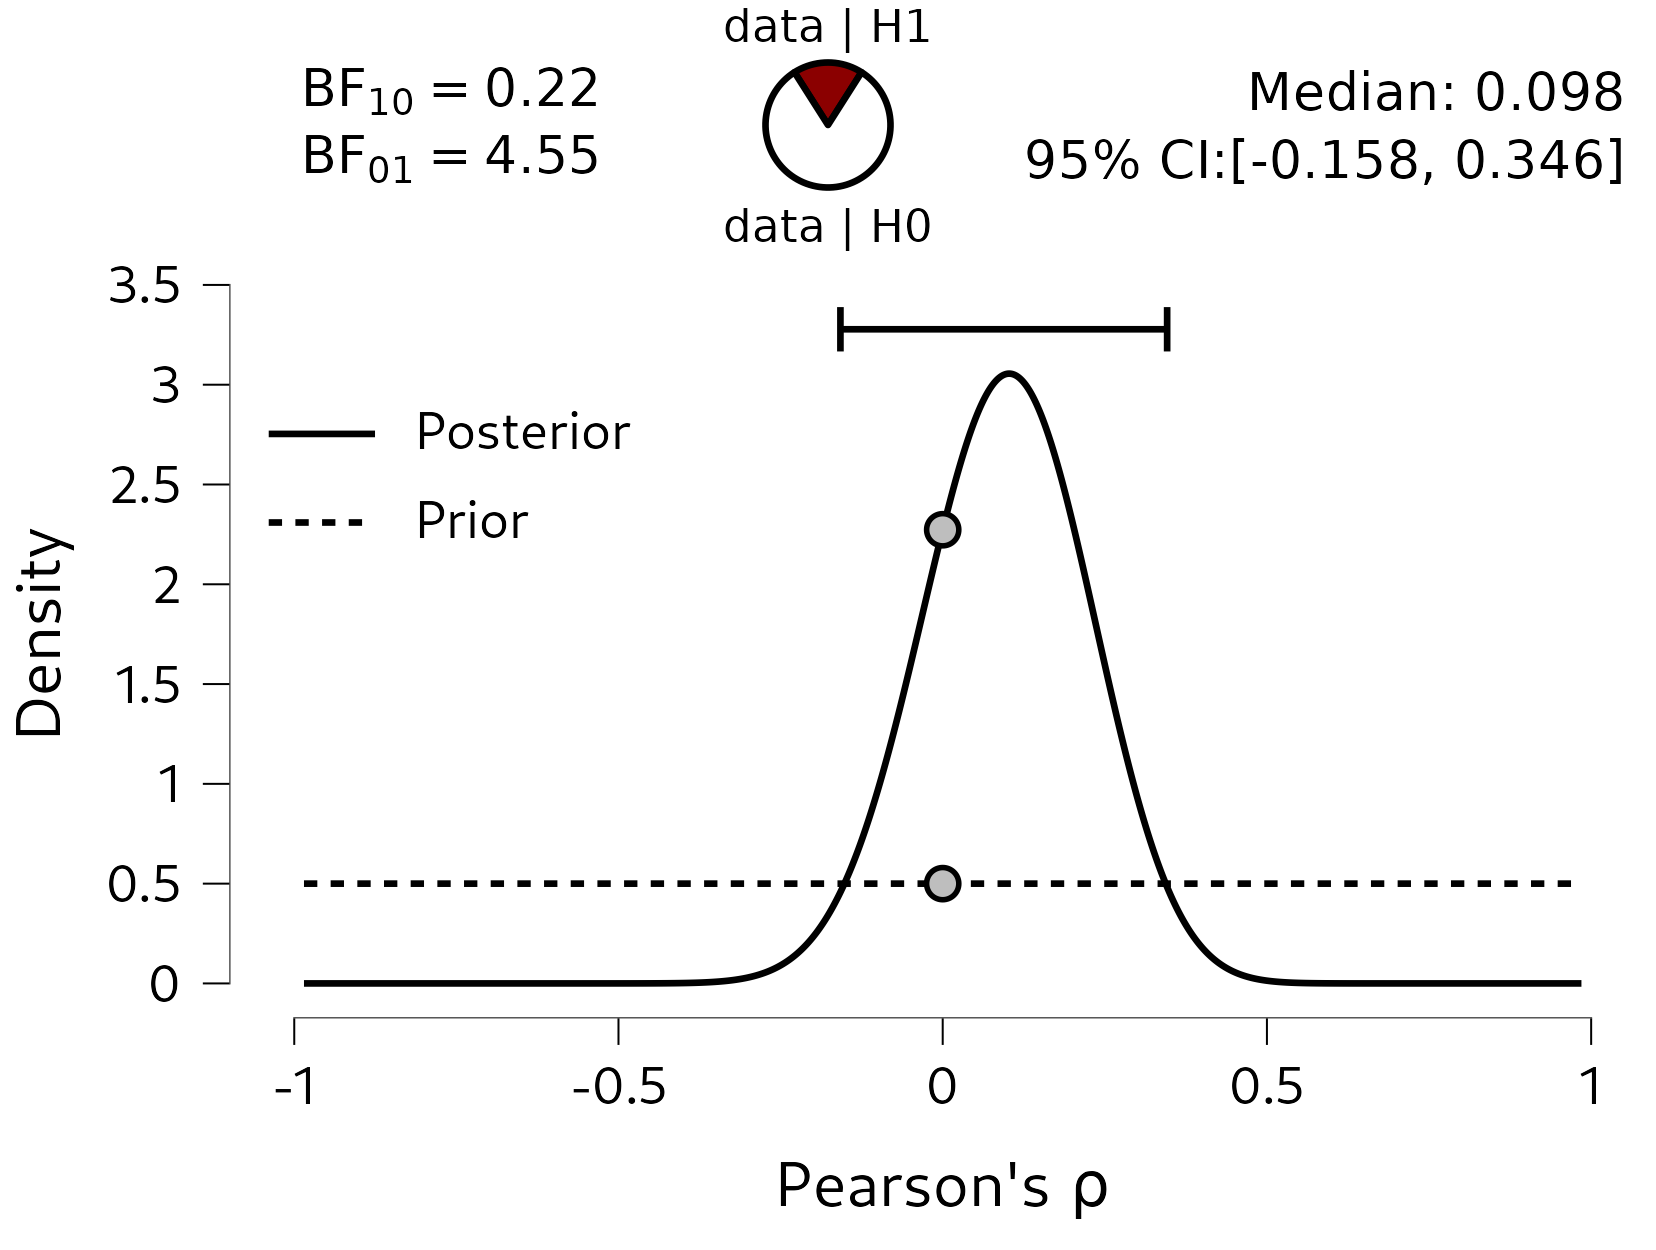 The posterior distribution of rho, based on a two-sided uniform prior distribution. Under this model, there is a 95% probability that rho is between -0.155 and 0.331. There is moderate evidence in favor of the null hypothesis: the data are 4.5 times more likely under the null model, compared to the alternative model.